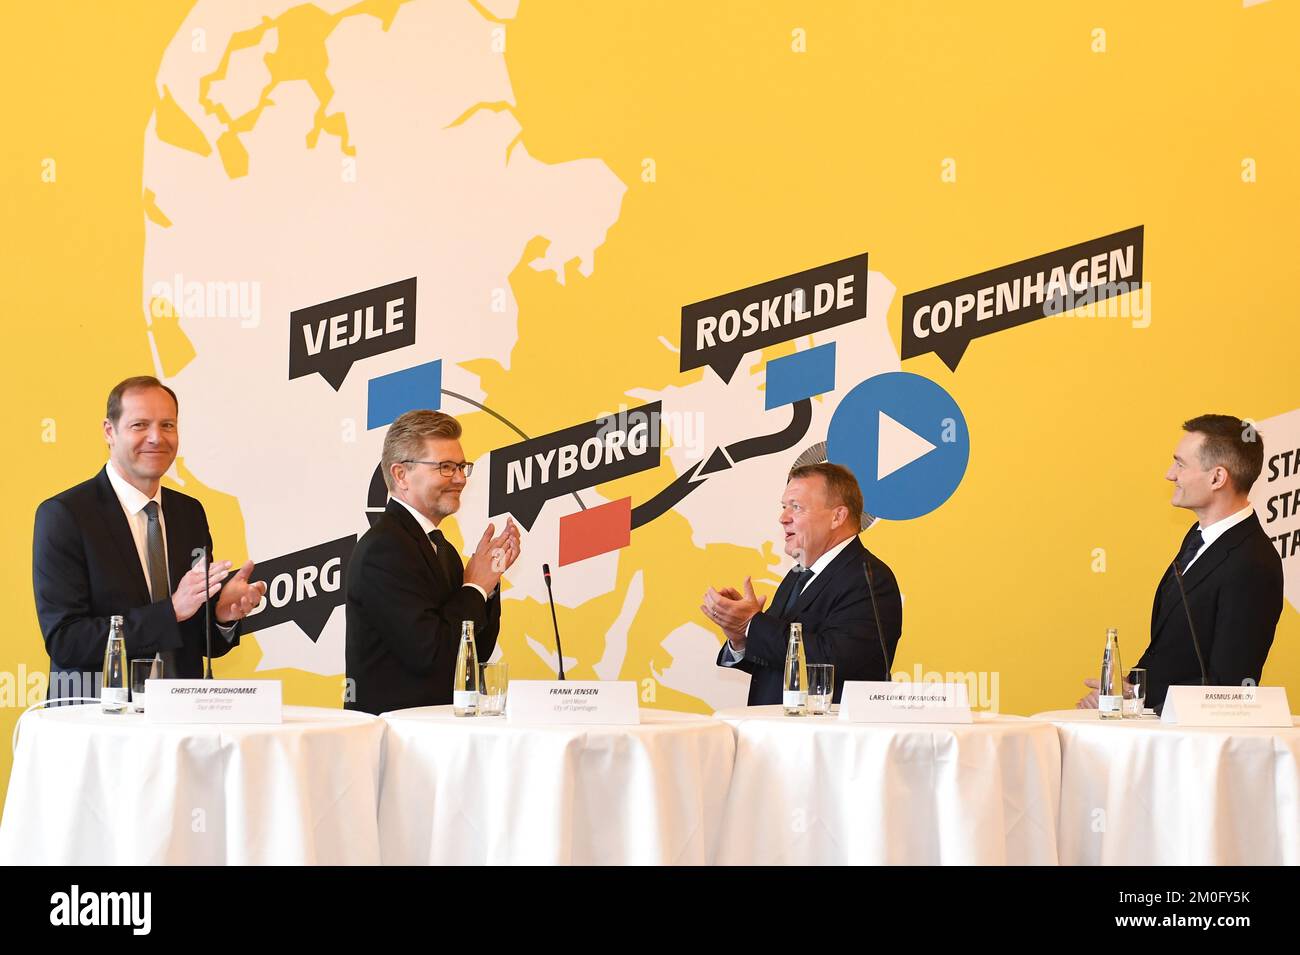 On February 21st 2019 Prime Minister Lars Løkke Rasmussen hosted a press conference at Copenhagen City Hall, where the Danish Tour de France start in 2021 was officially announced. The tour will complete 3 stages in Denmark: A time trial in central Copenhagen and two normal stages from Roskilde to Nyborg over the Great Belt Bridge and from Vejle to Sønderborg. Also in attendance at the press conference were protector for the event HRH Crown Prince Frederik, Tour de France boss Christian Prudhomme, Lord Mayor of Copenhagen Frank Jensen and Minister for Business Rasmus Jarlov. Stock Photo